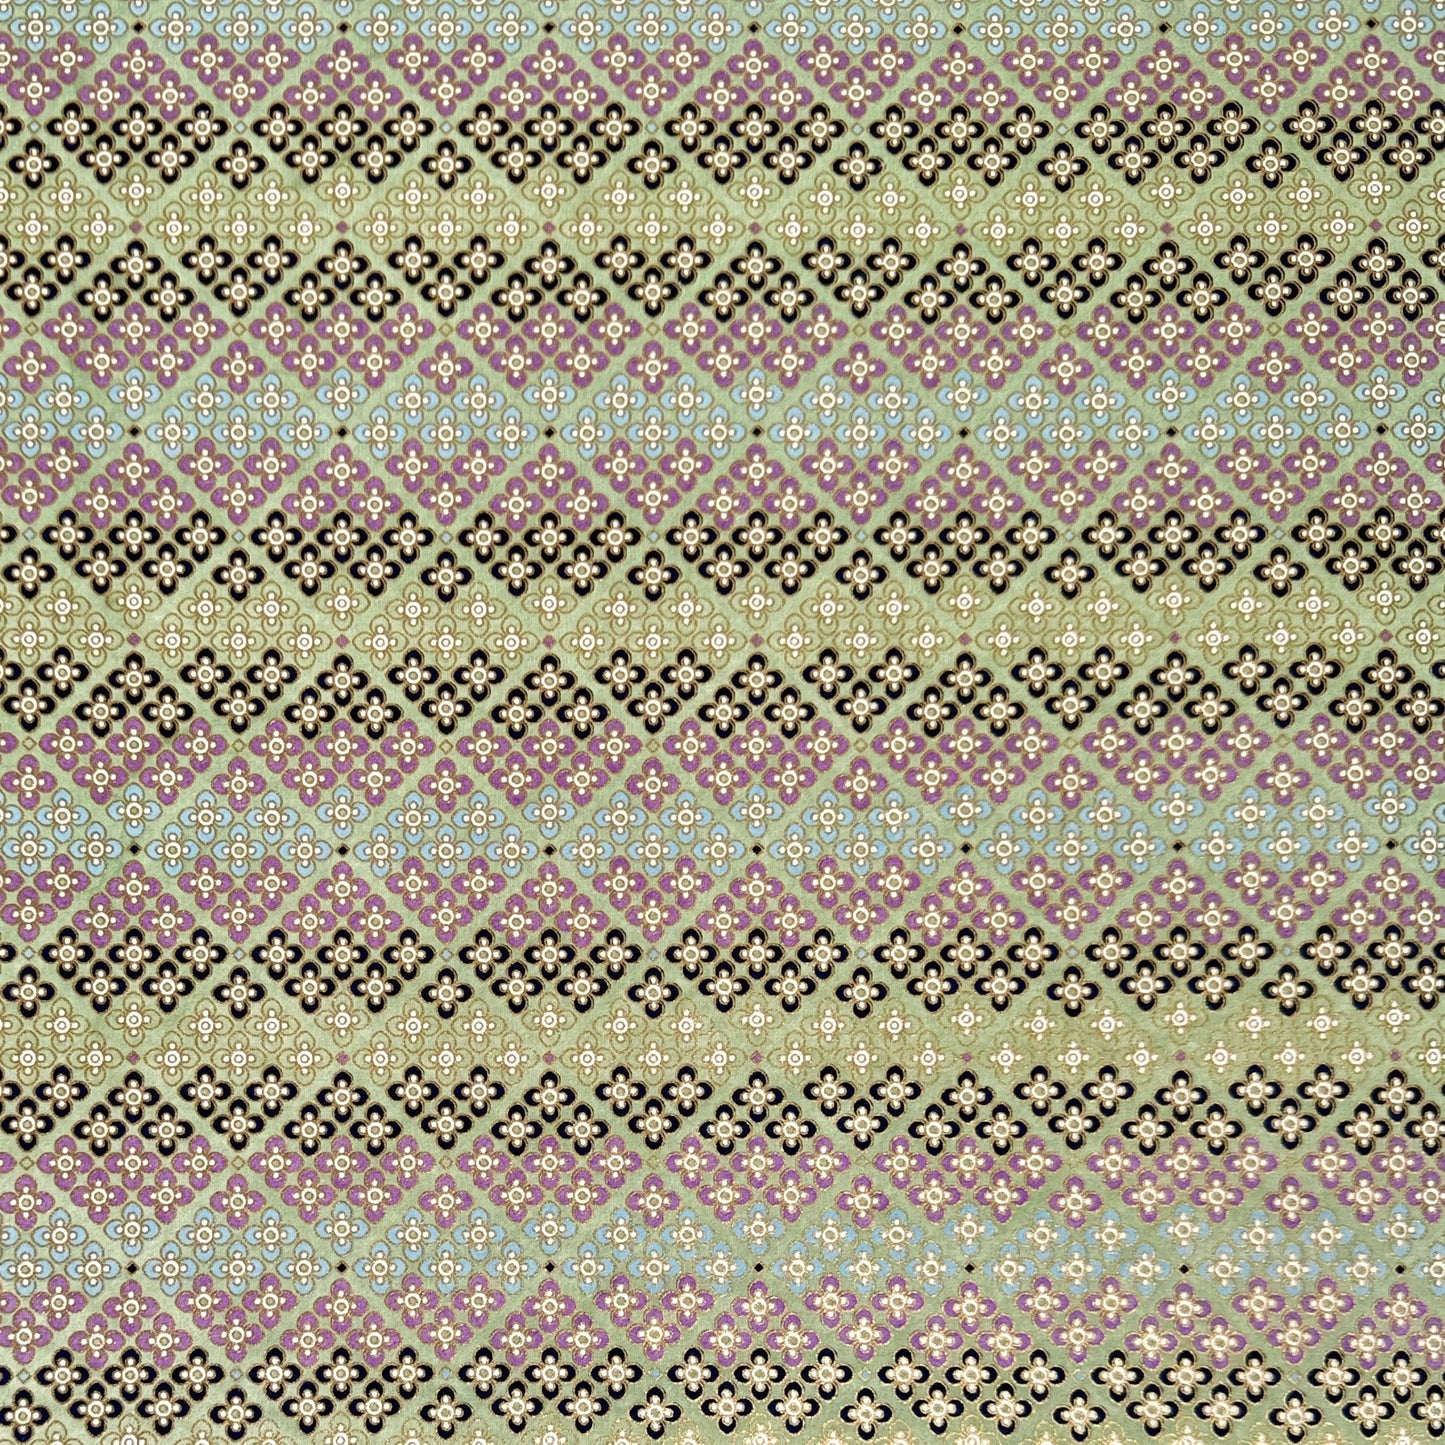 Japanese silkscreen chiyogami paper with a repeat pattern of stripes of a small floral motif in black, lilac and blue on a moss green backdrop